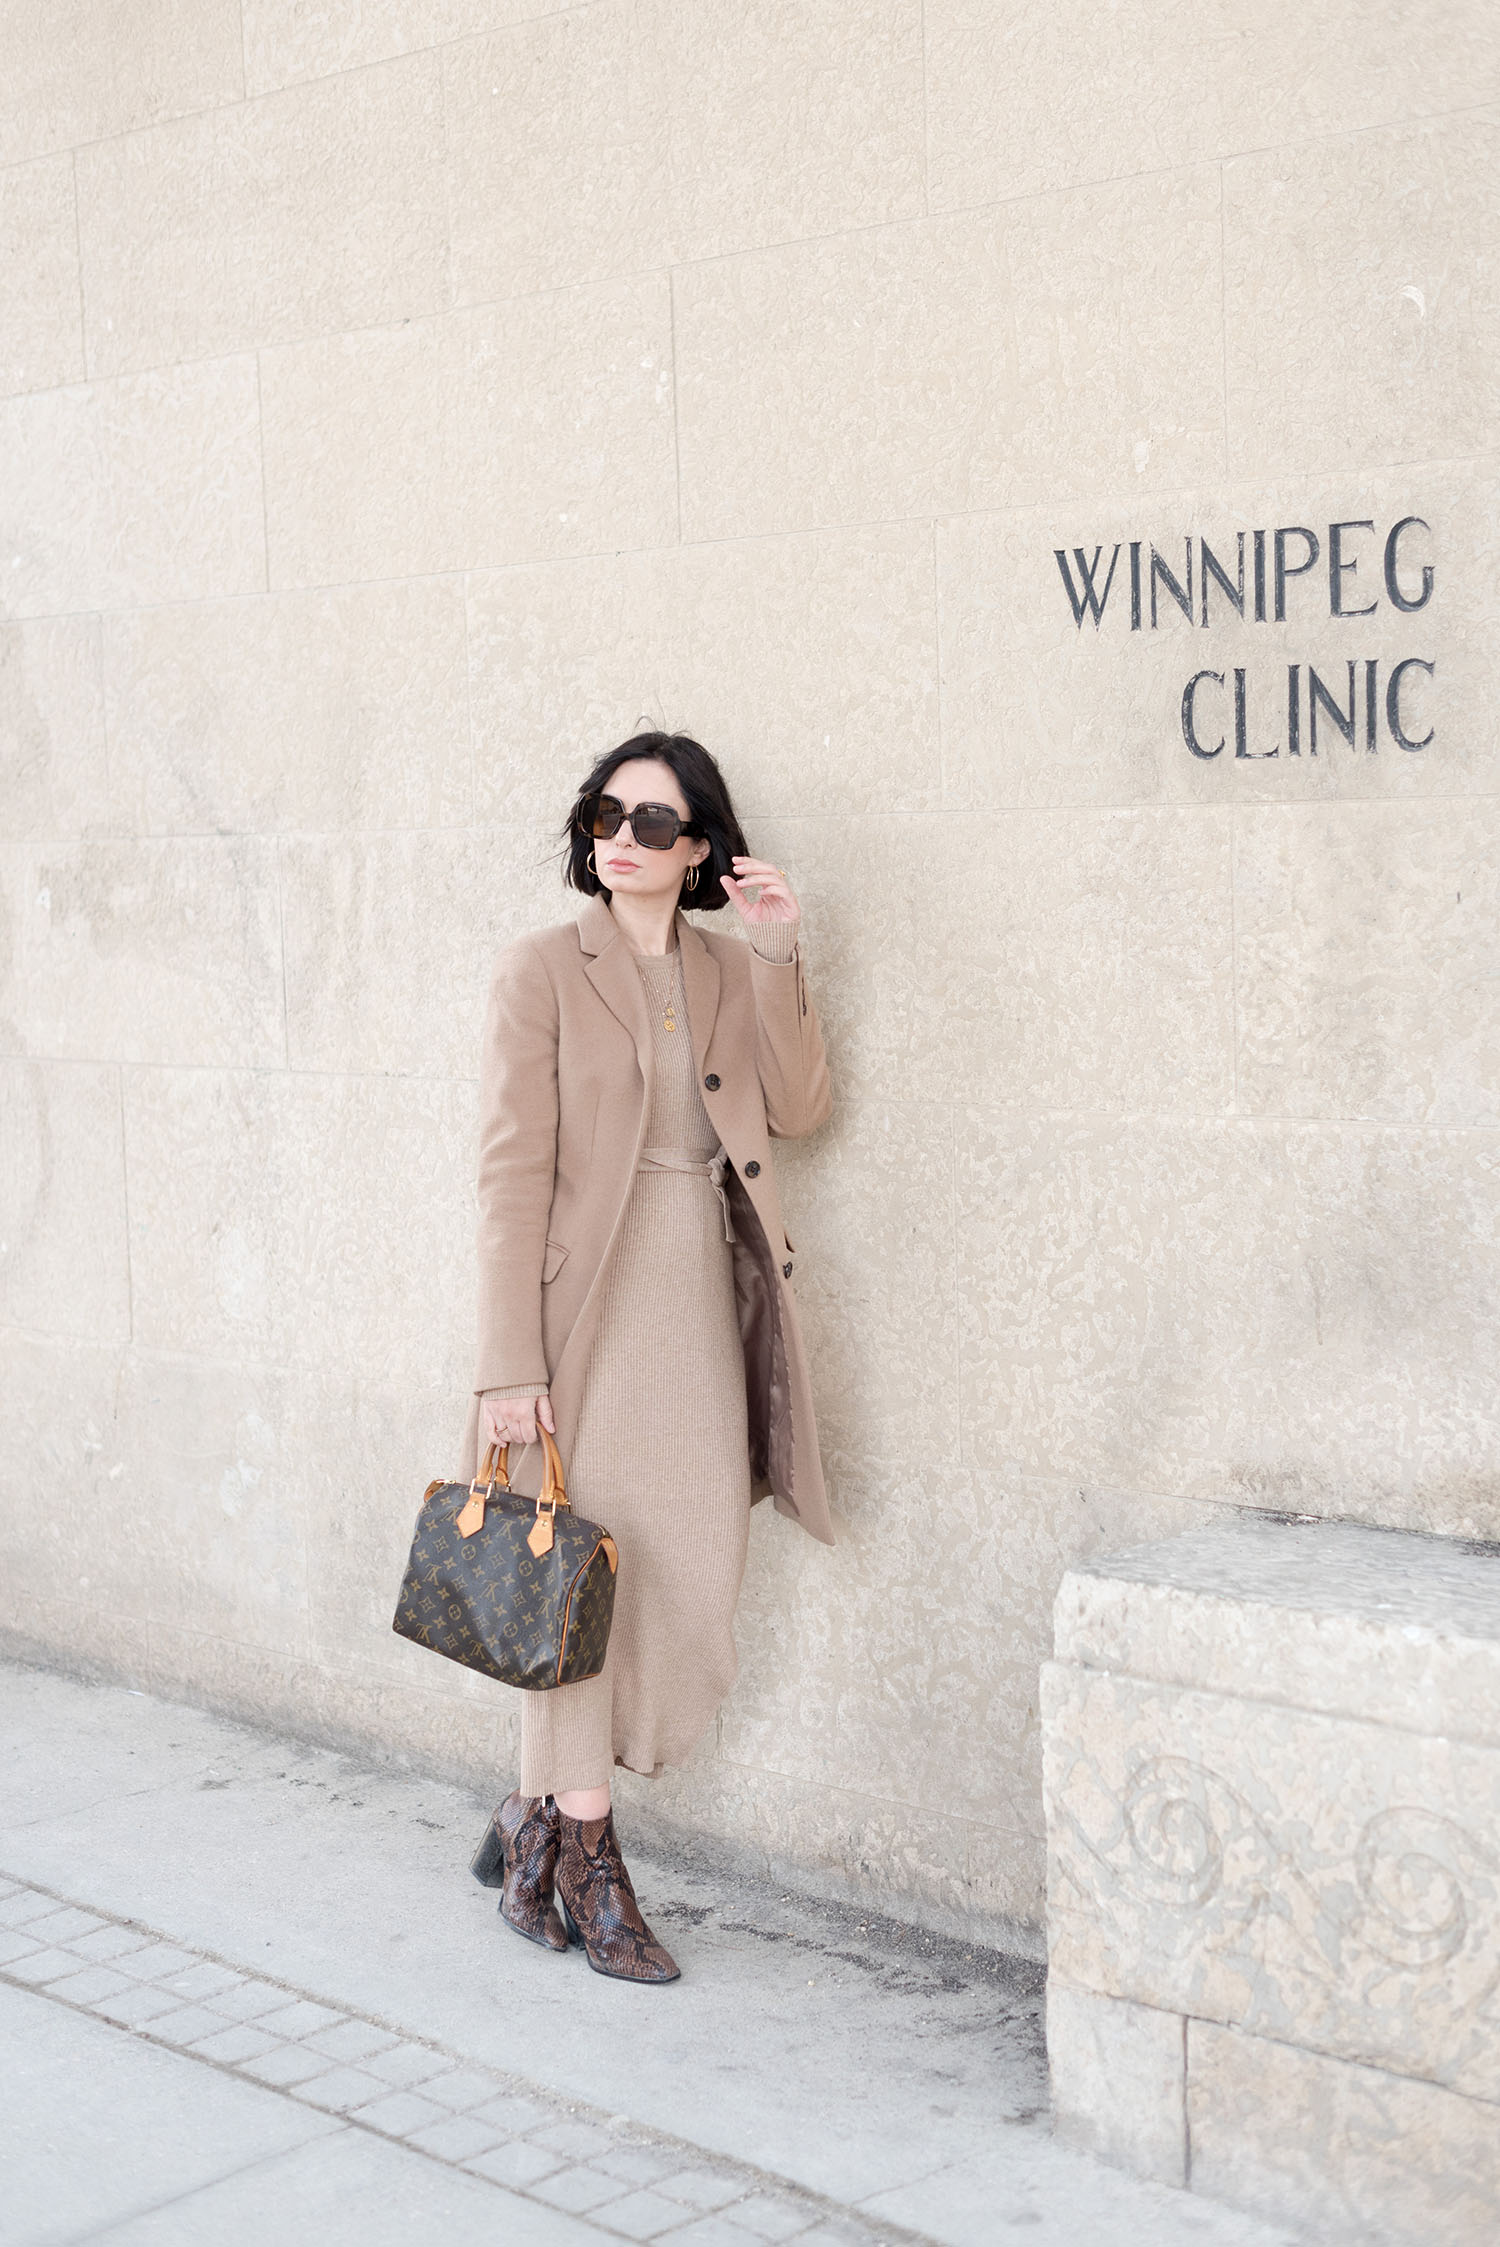 Top Canadian fashion blogger Cee Fardoe of Coco & Vera wears her signature colours in the form of a Uniqlo camel coat and carries a Louis Vuitton Speedy 25 handbag